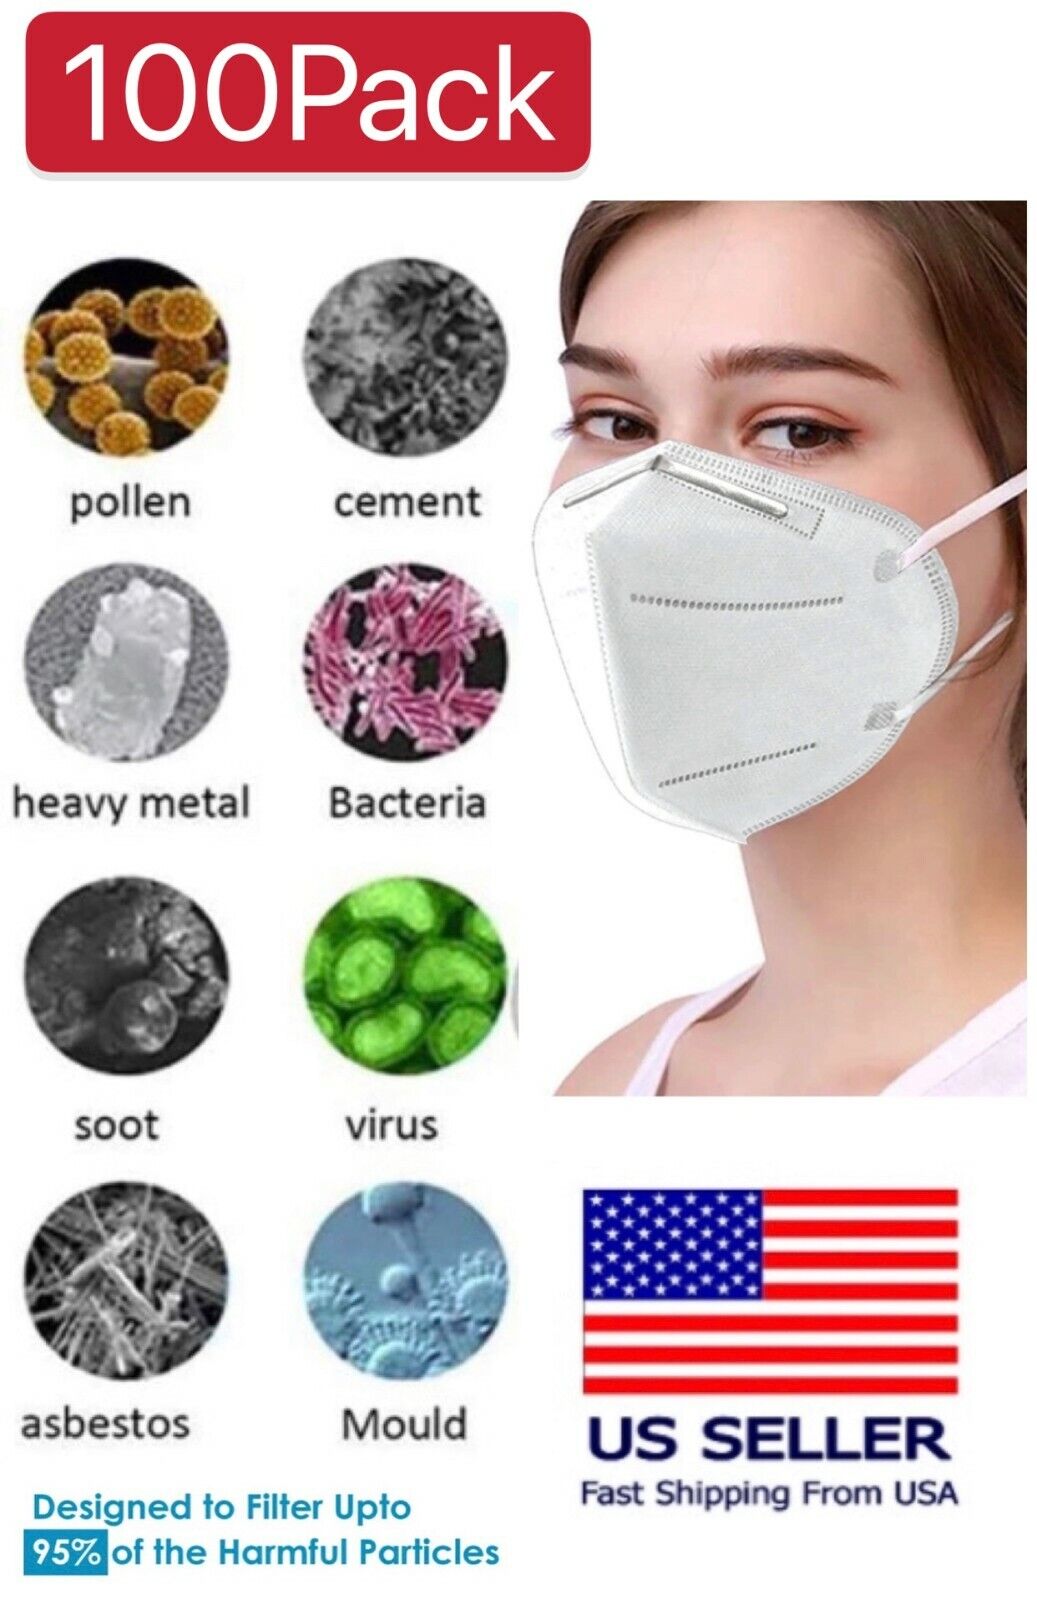 [100 PACK] KN95 Protective 5 Layer Face Mask BFE 95% PM2.5 Disposable Respirator Unbranded KN95-FACE-MASK-X100